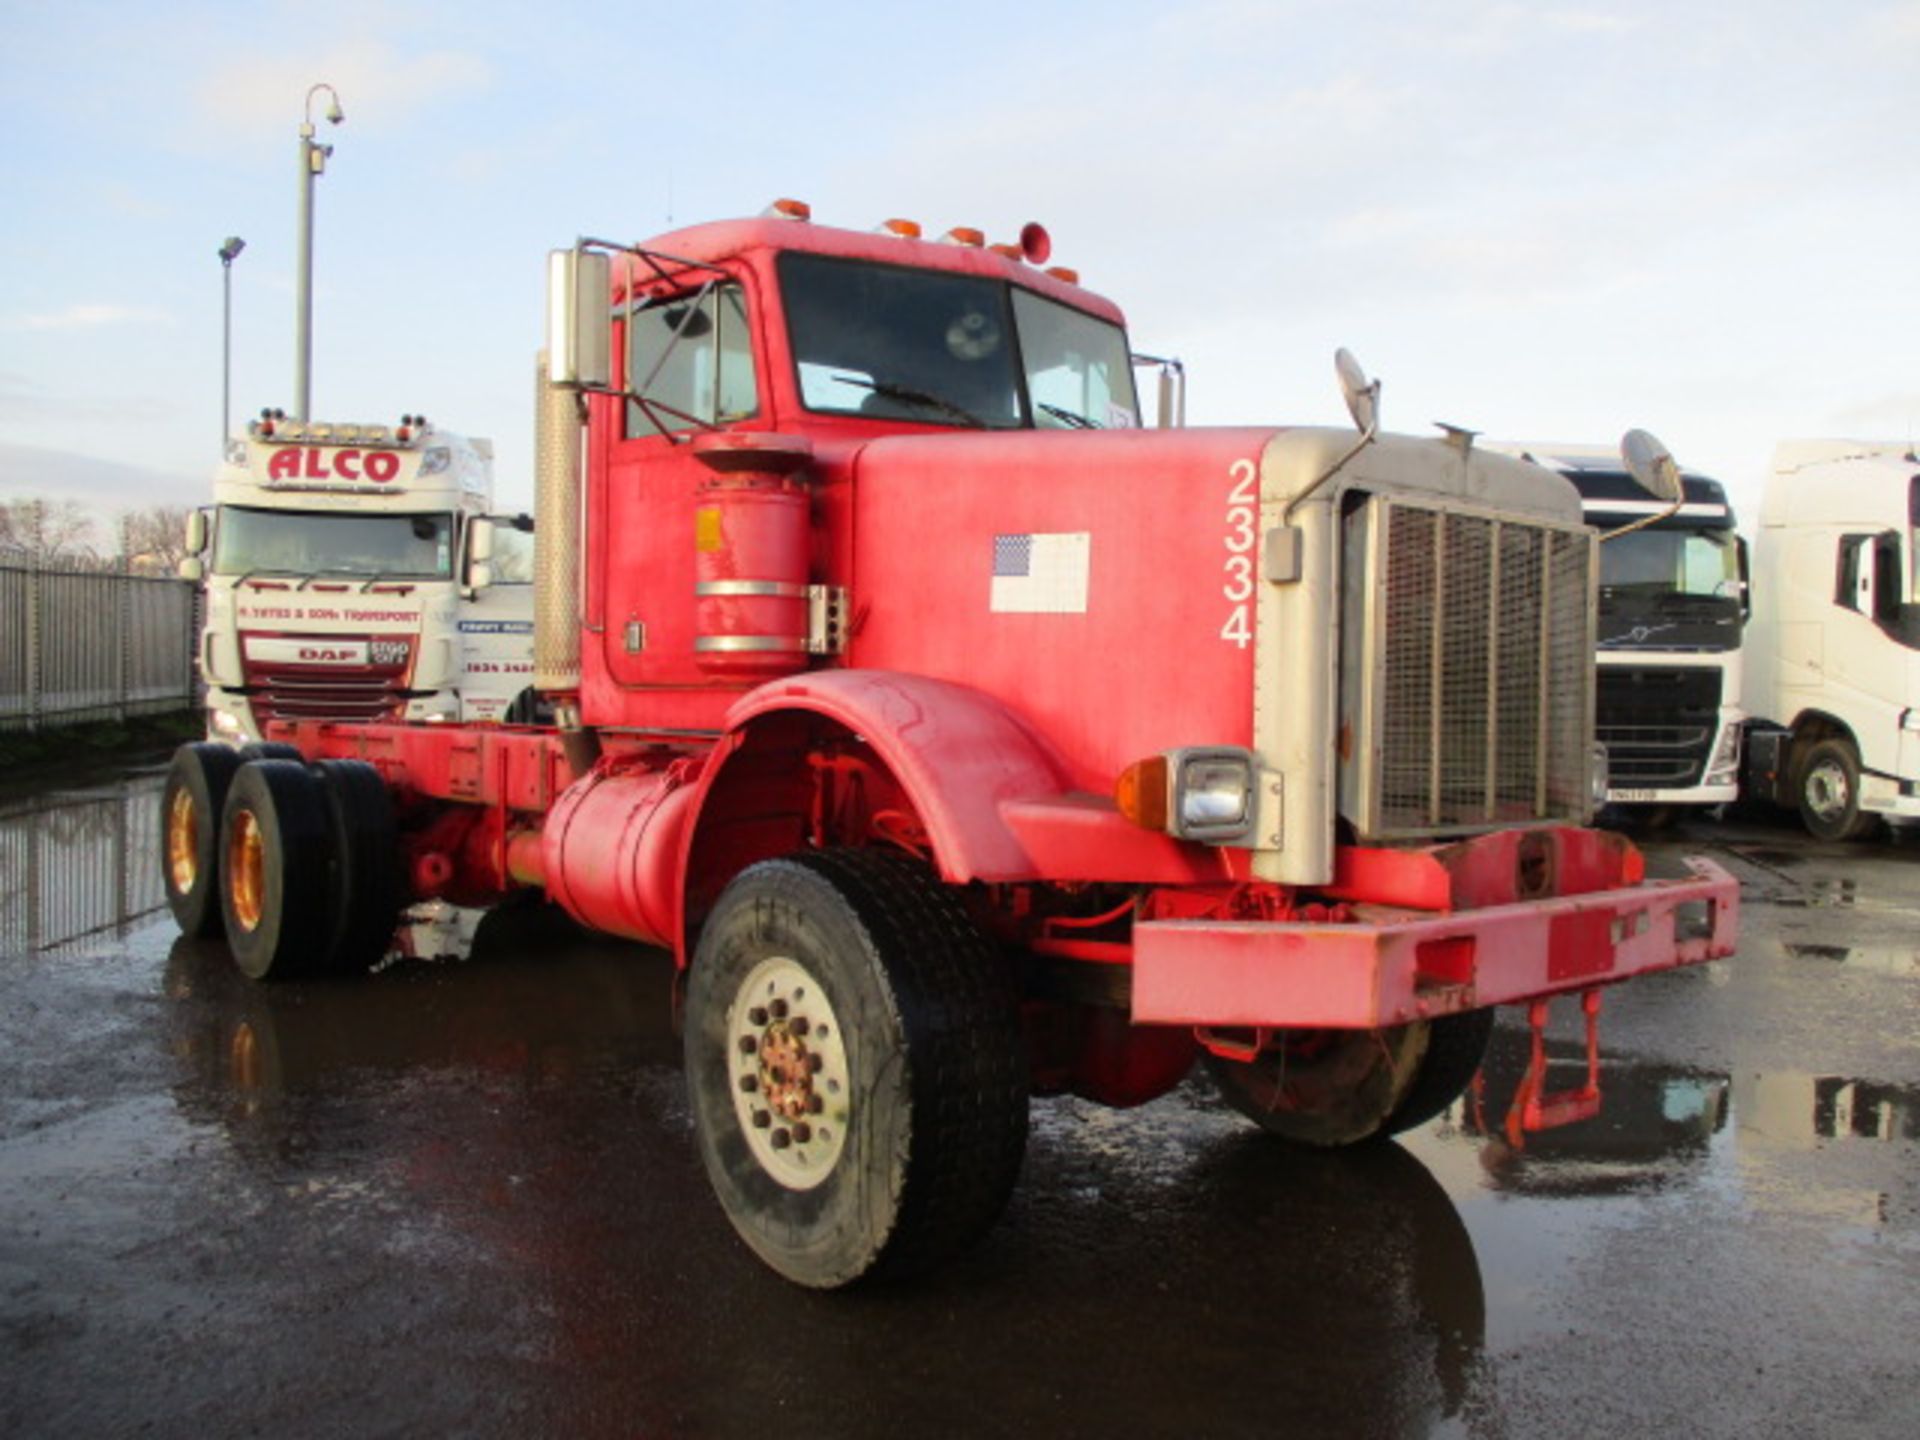 PETERBILT 357 Day Cab Diesel - VIN: 1XPAMA0X6TN409329 - Year: 1996 - 202,962 miles - 6x6 Chassis - Image 2 of 11